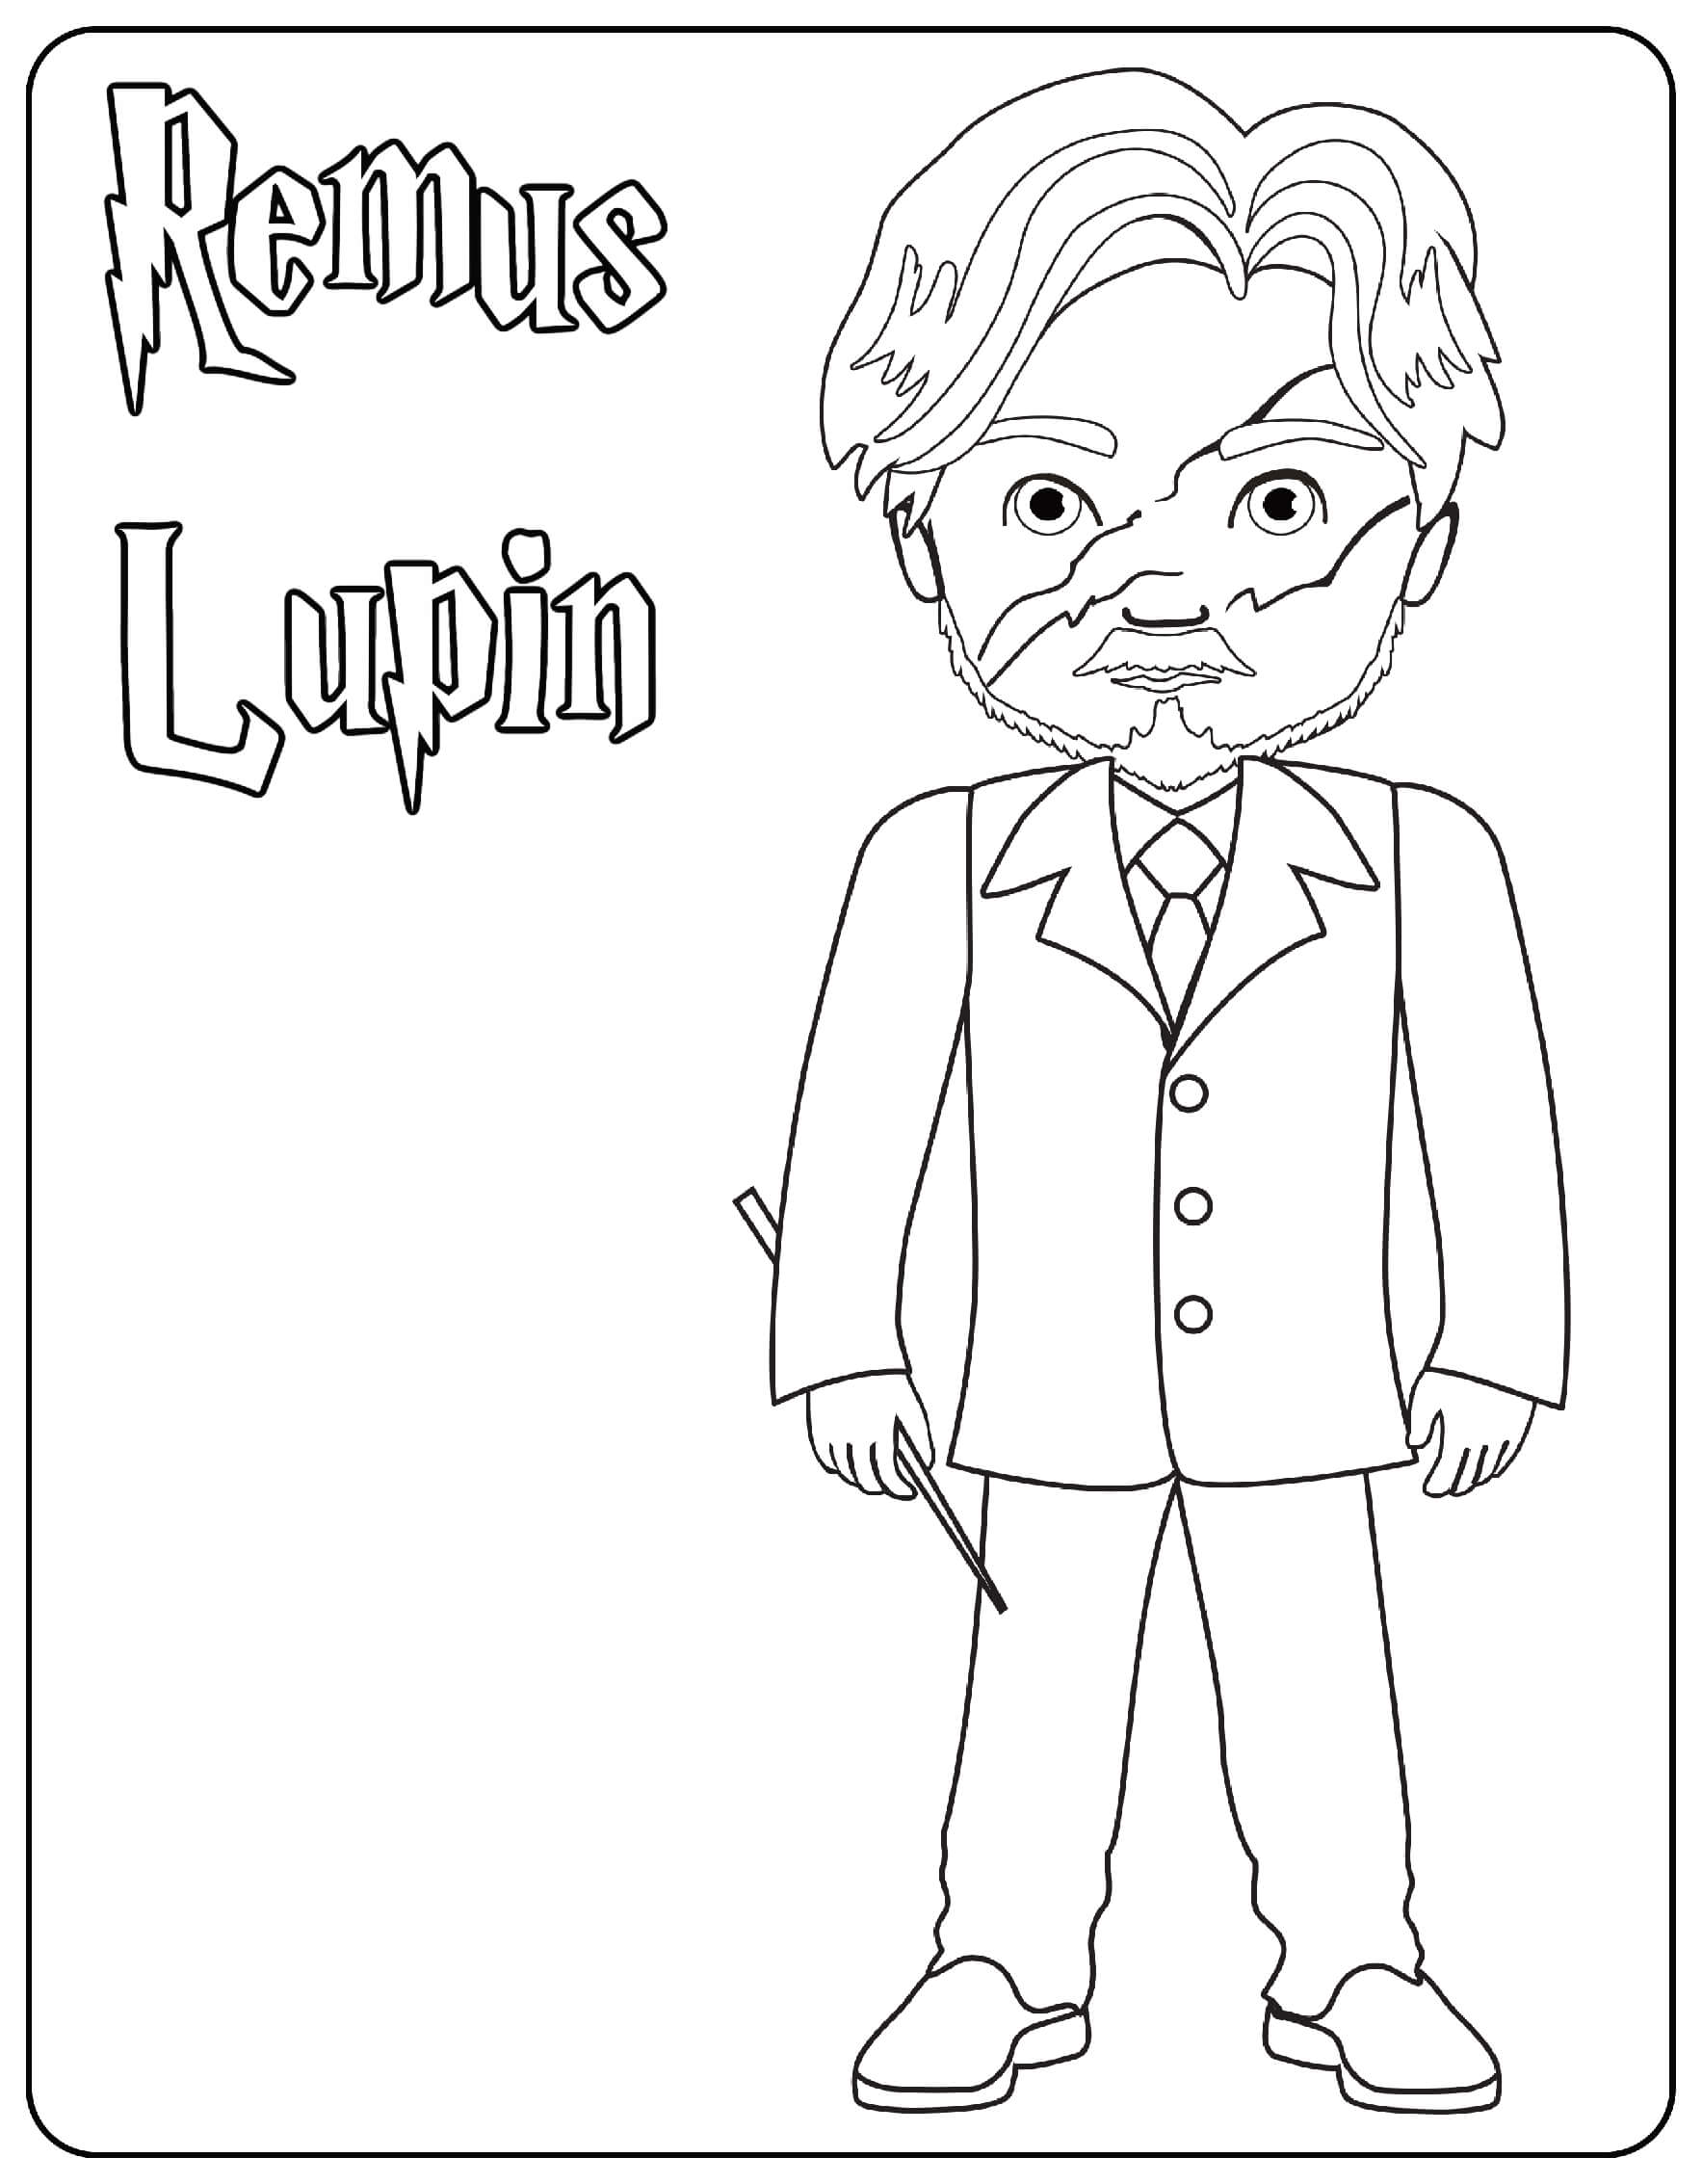 Remus Lupin Coloring Page